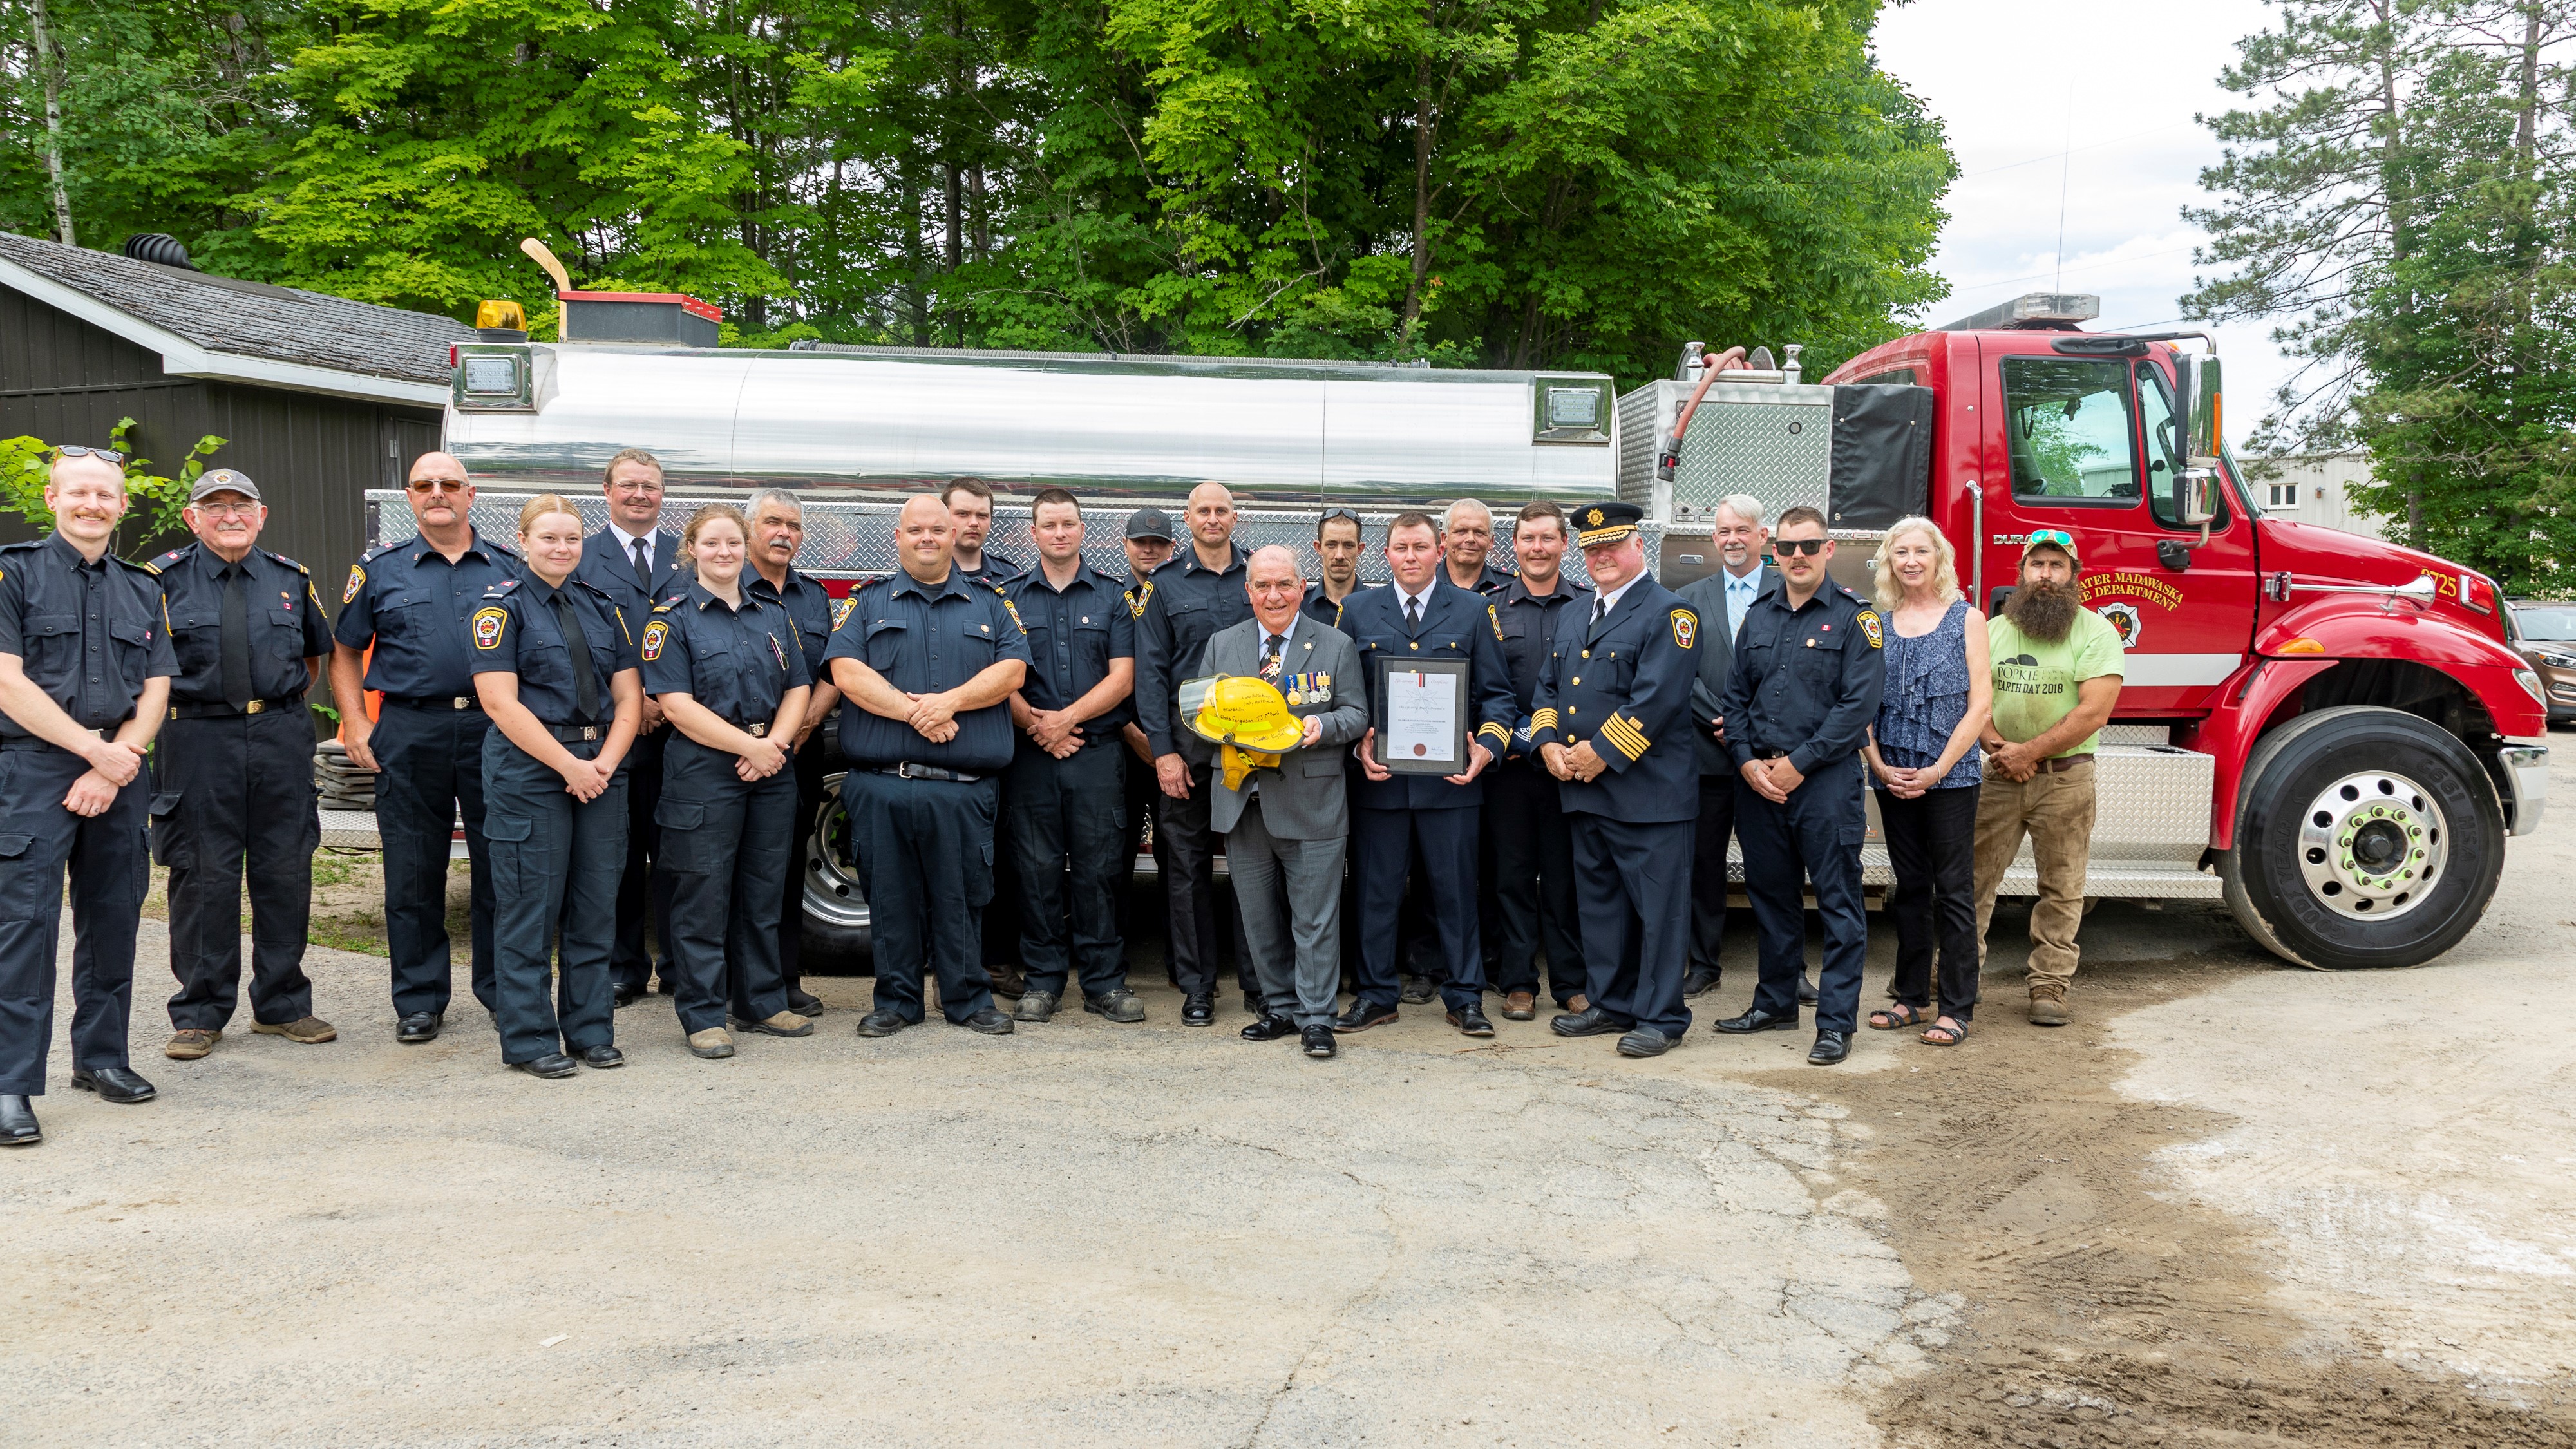 group of fire fighters standing in front of fire truck